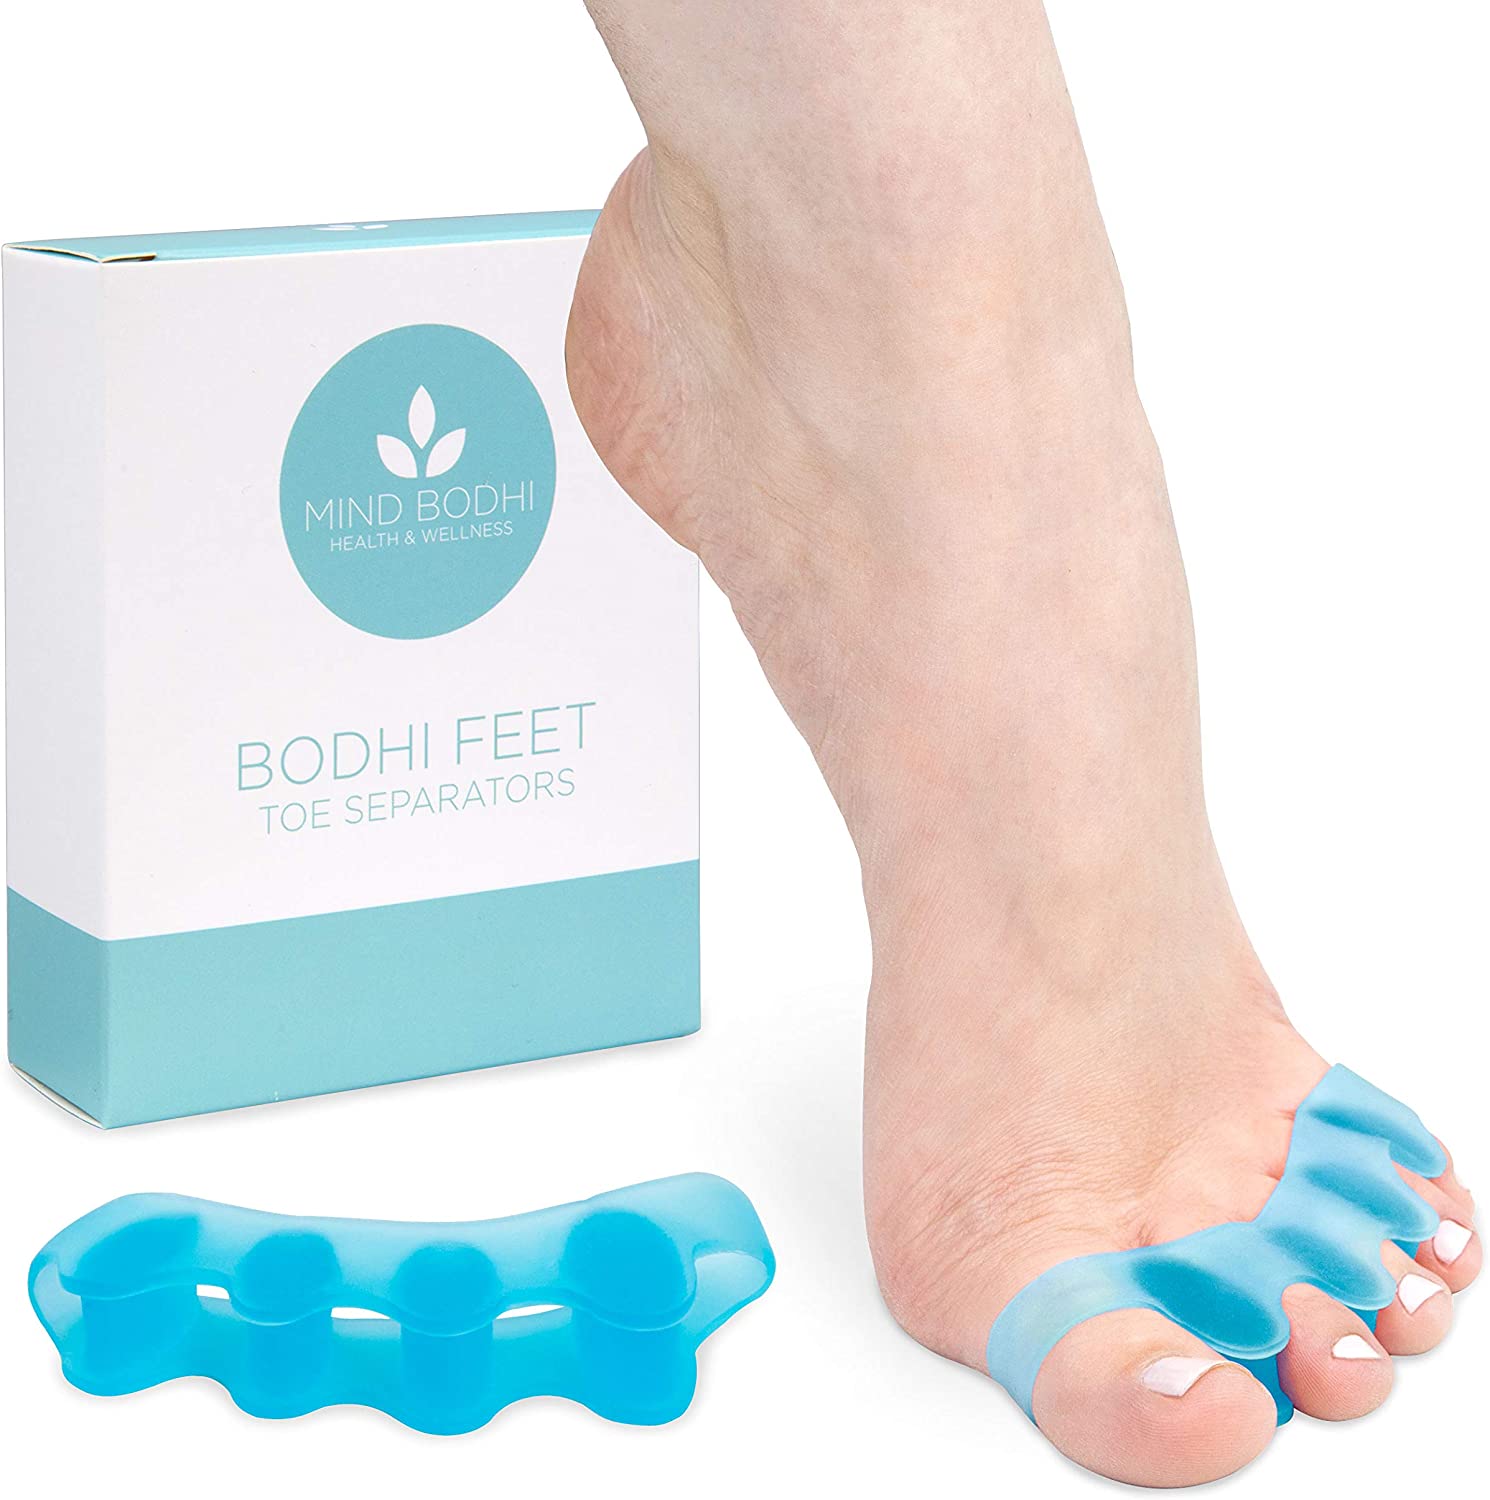 Review of Mind Bodhi Toe Separators to Correct Bunions